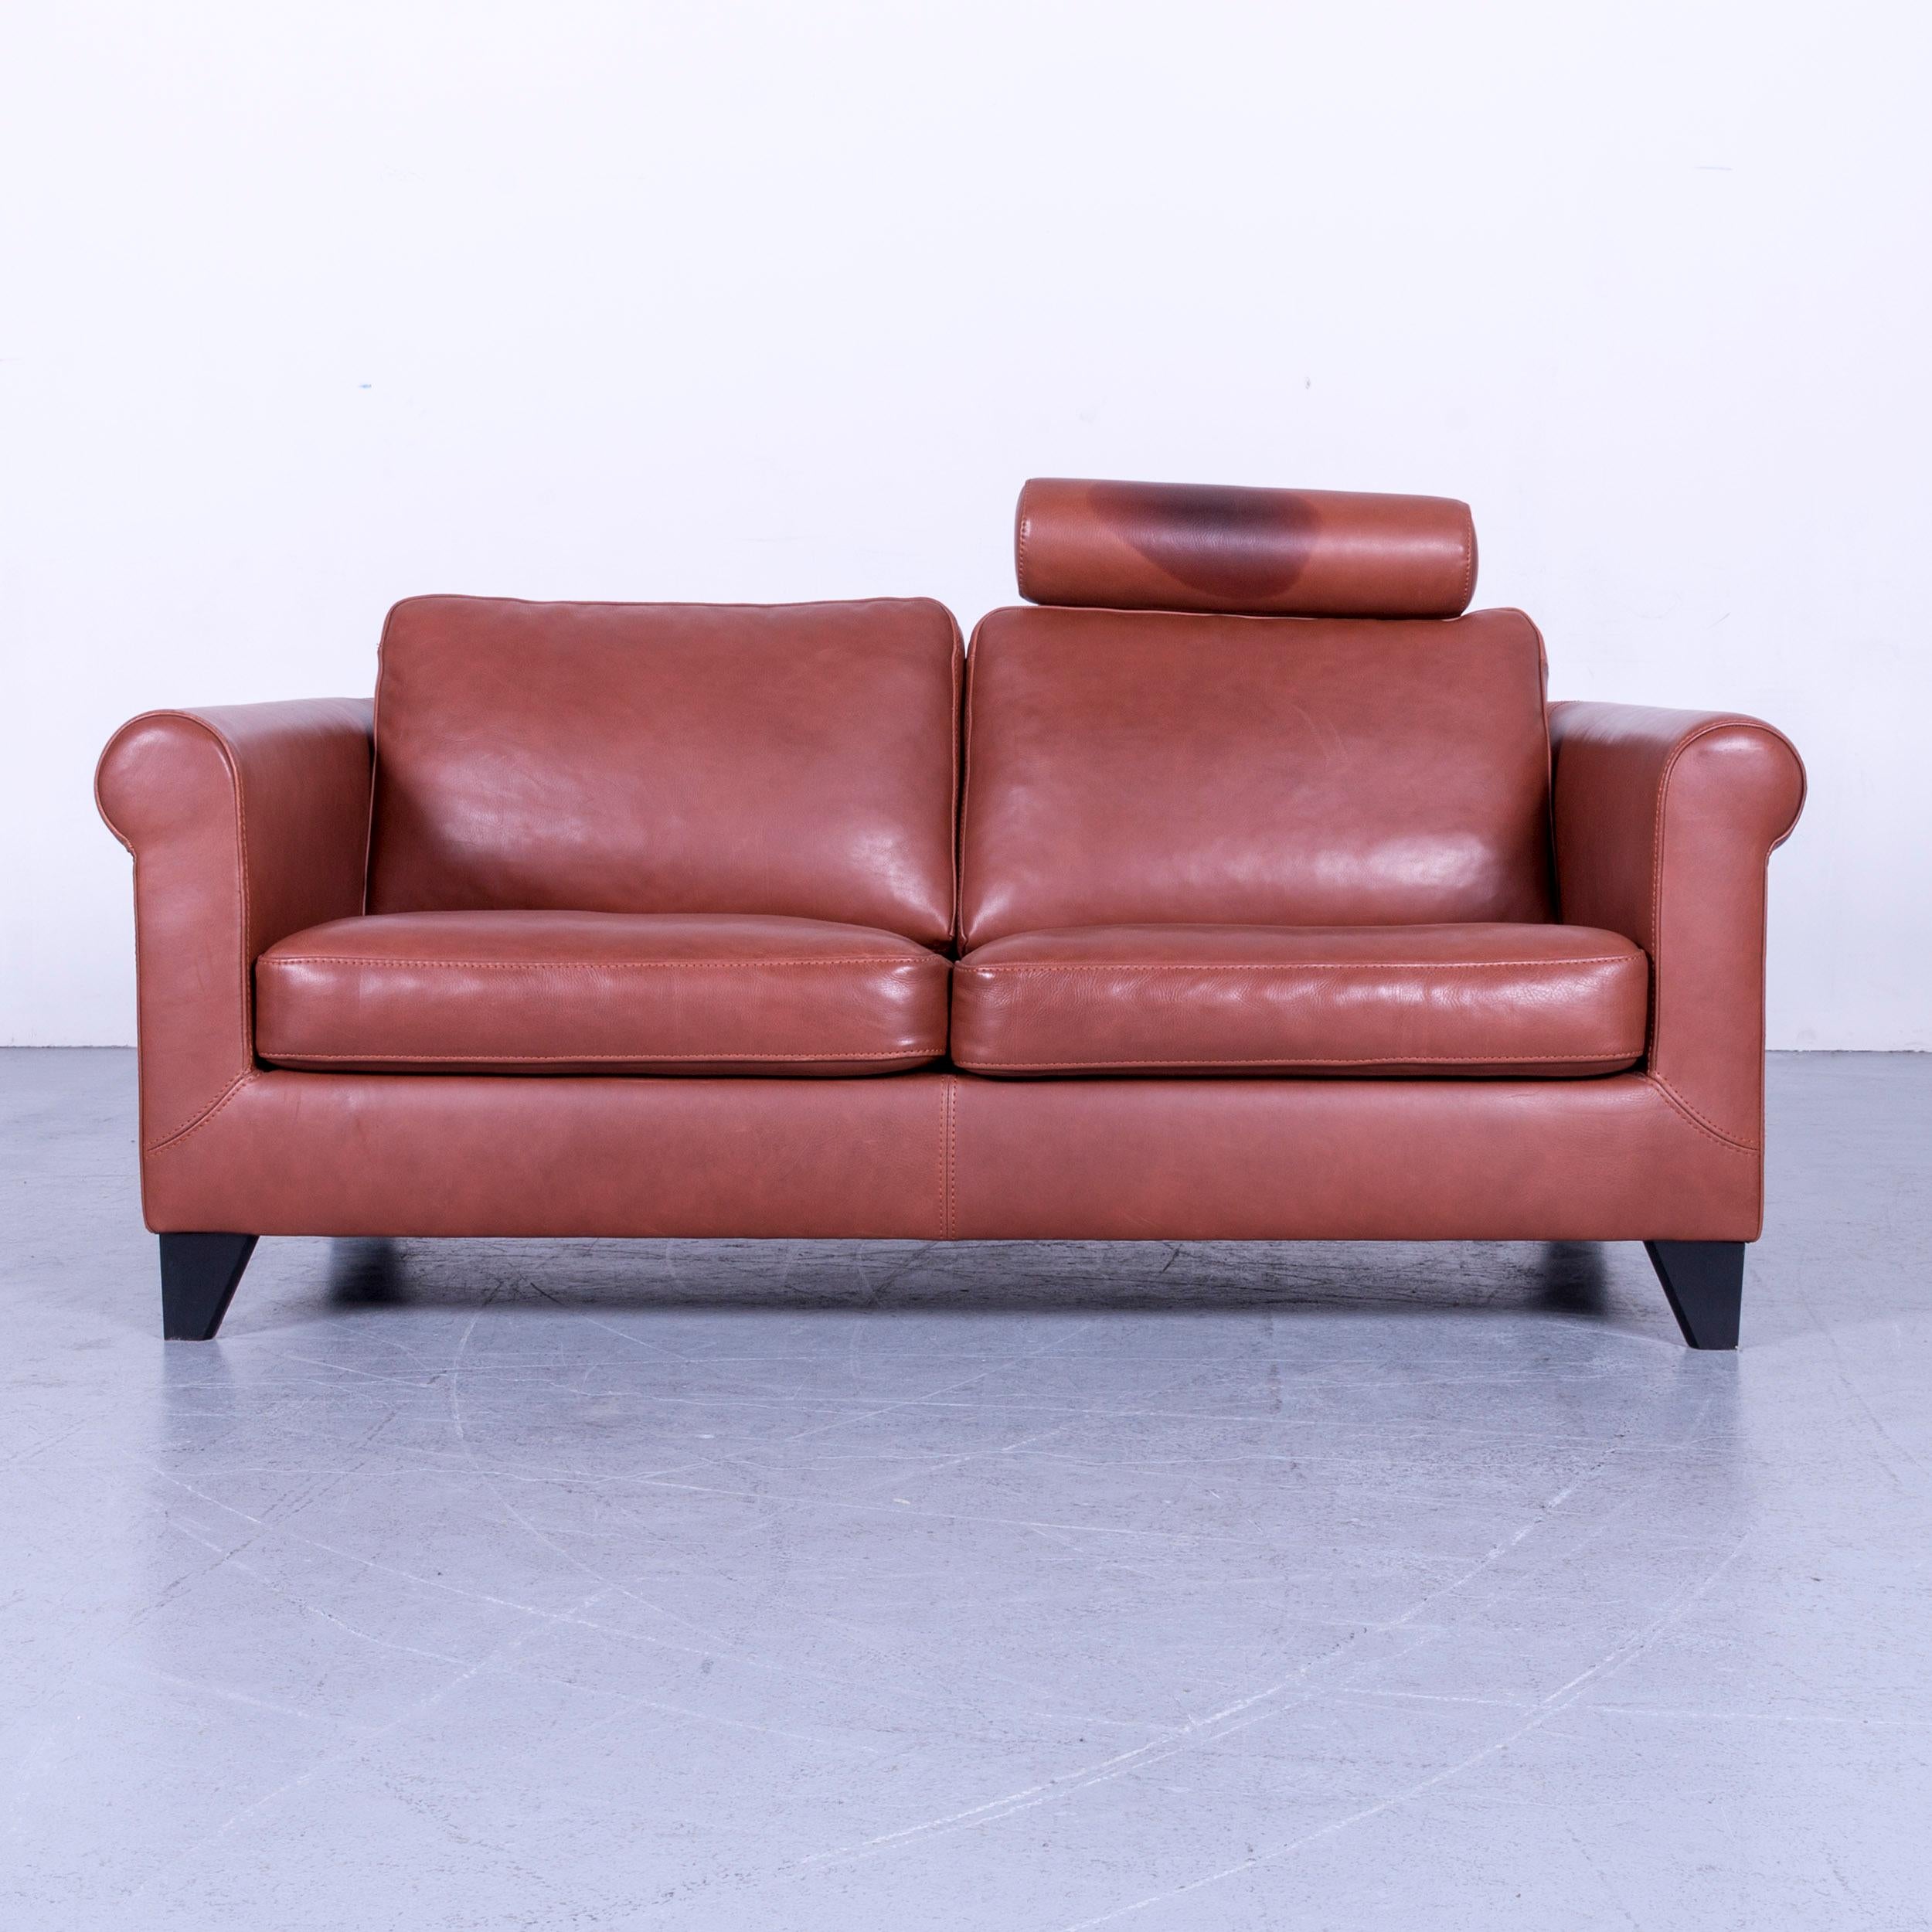 We bring to you an Machalke designer leather sofa set red two-seat couch.




























 